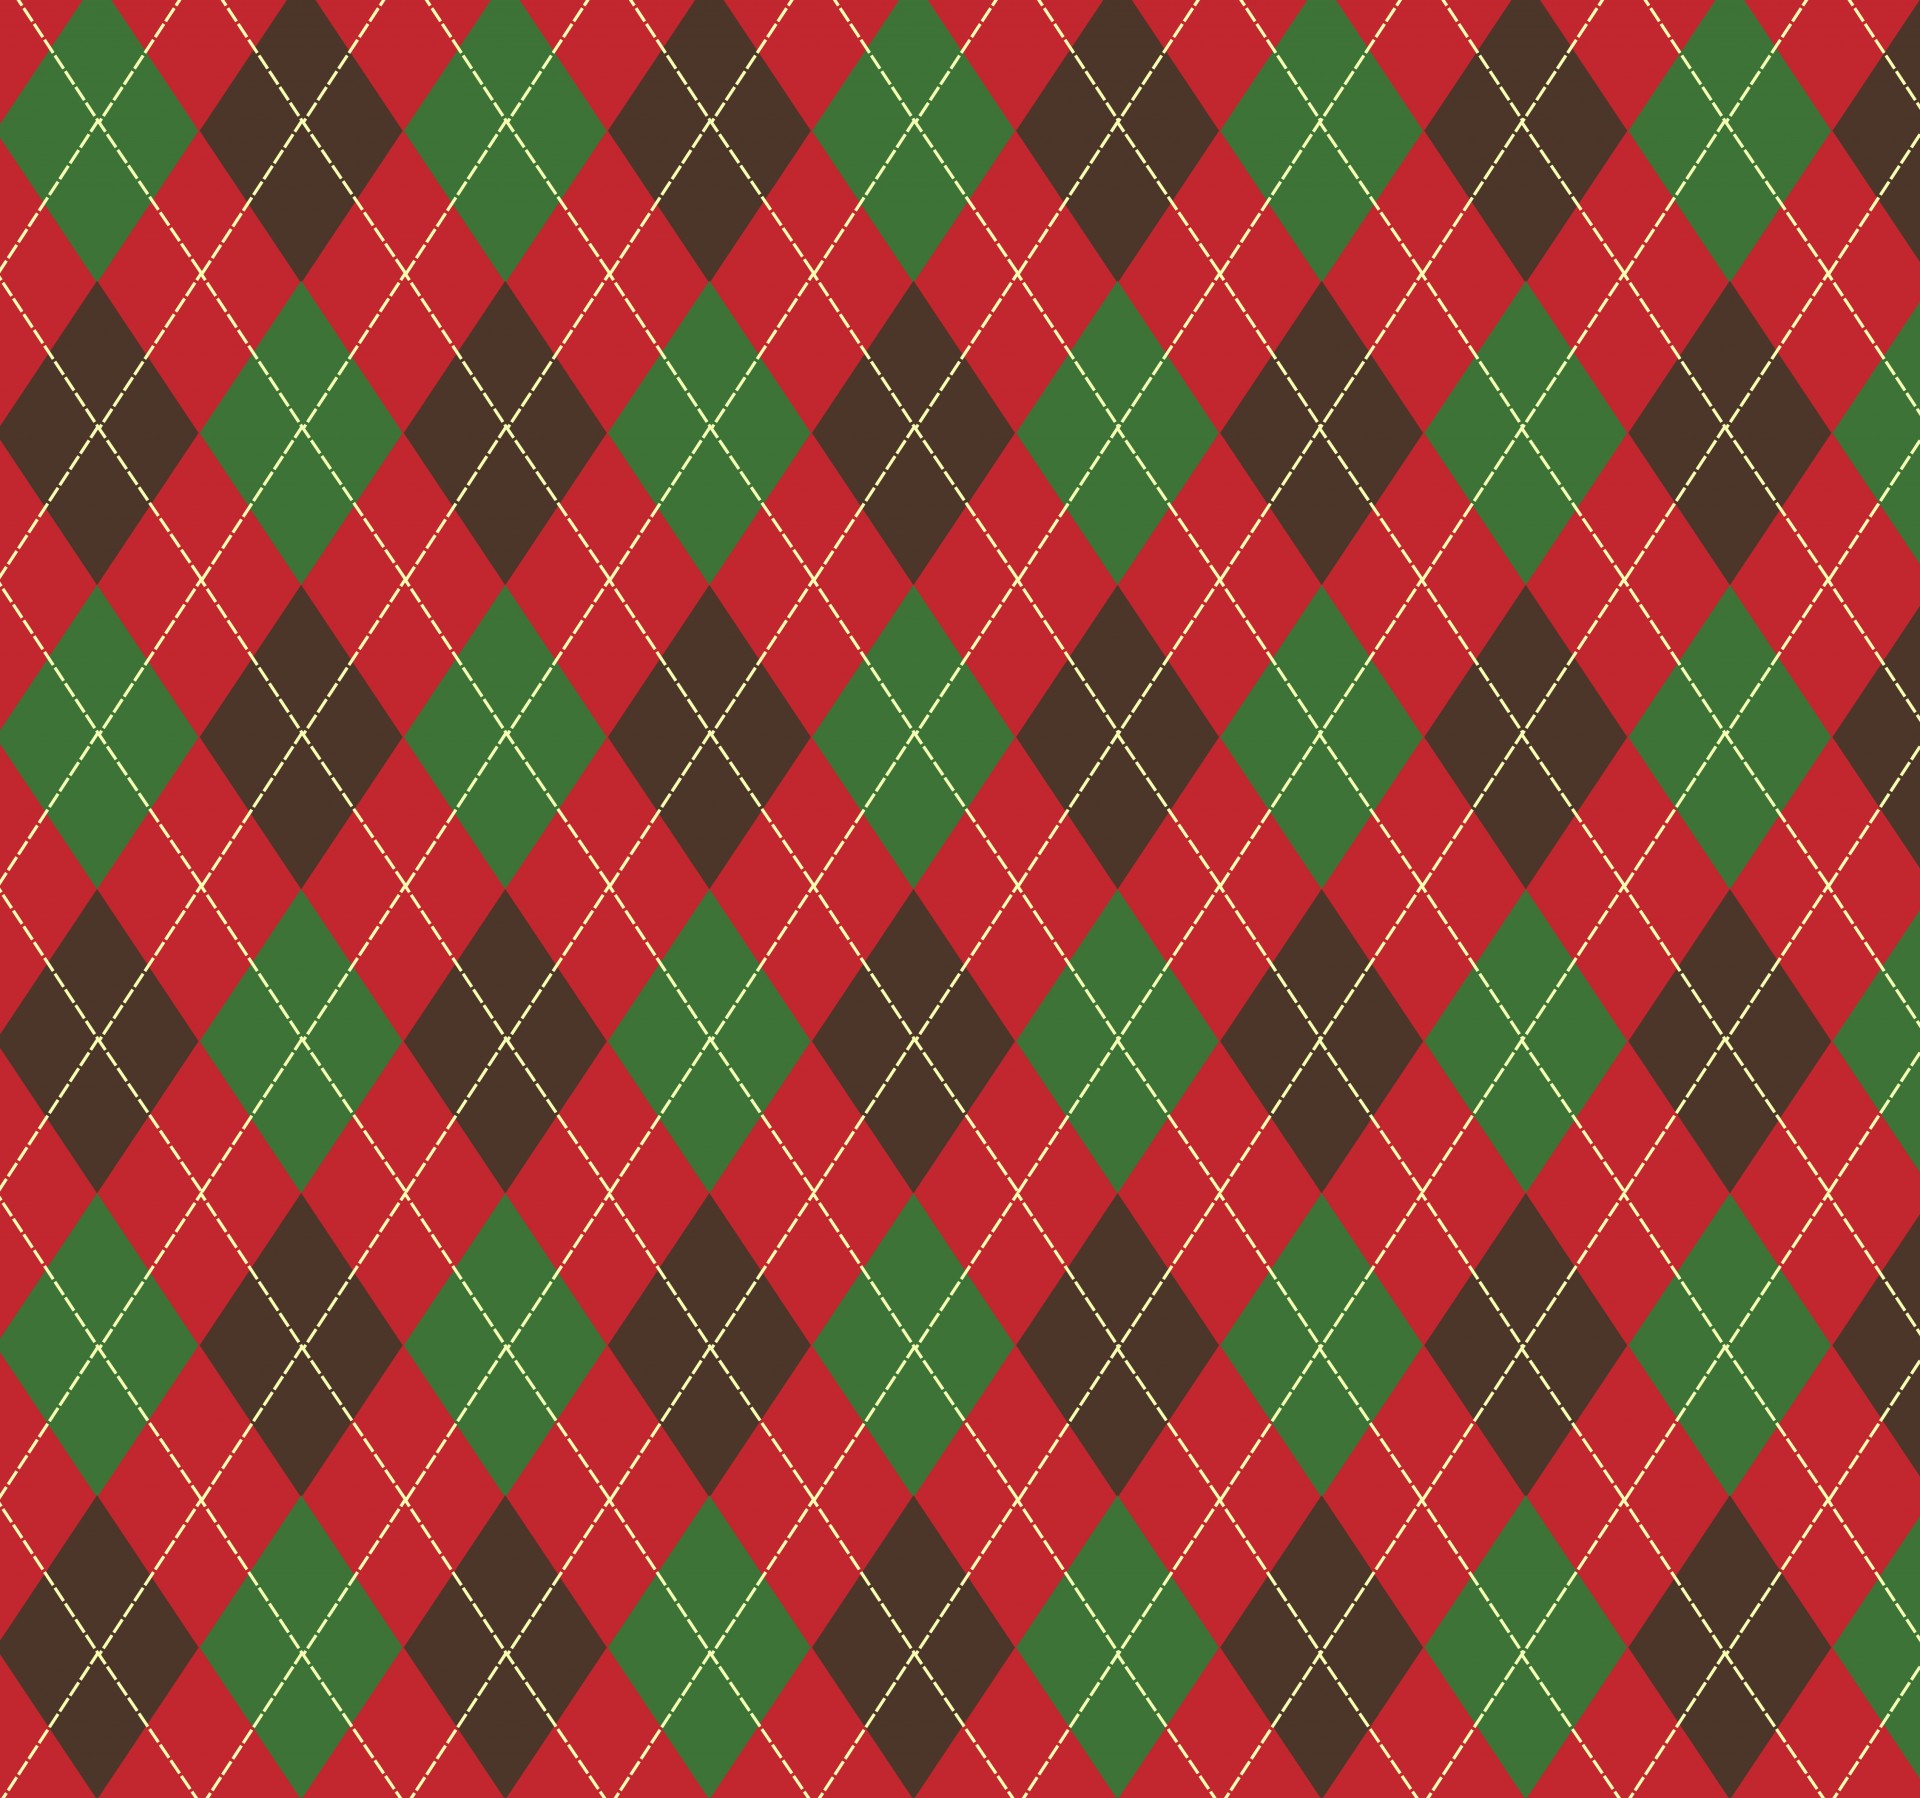 Argyle Pattern Background Free Photo - Red And Green Argyle Pattern - HD Wallpaper 